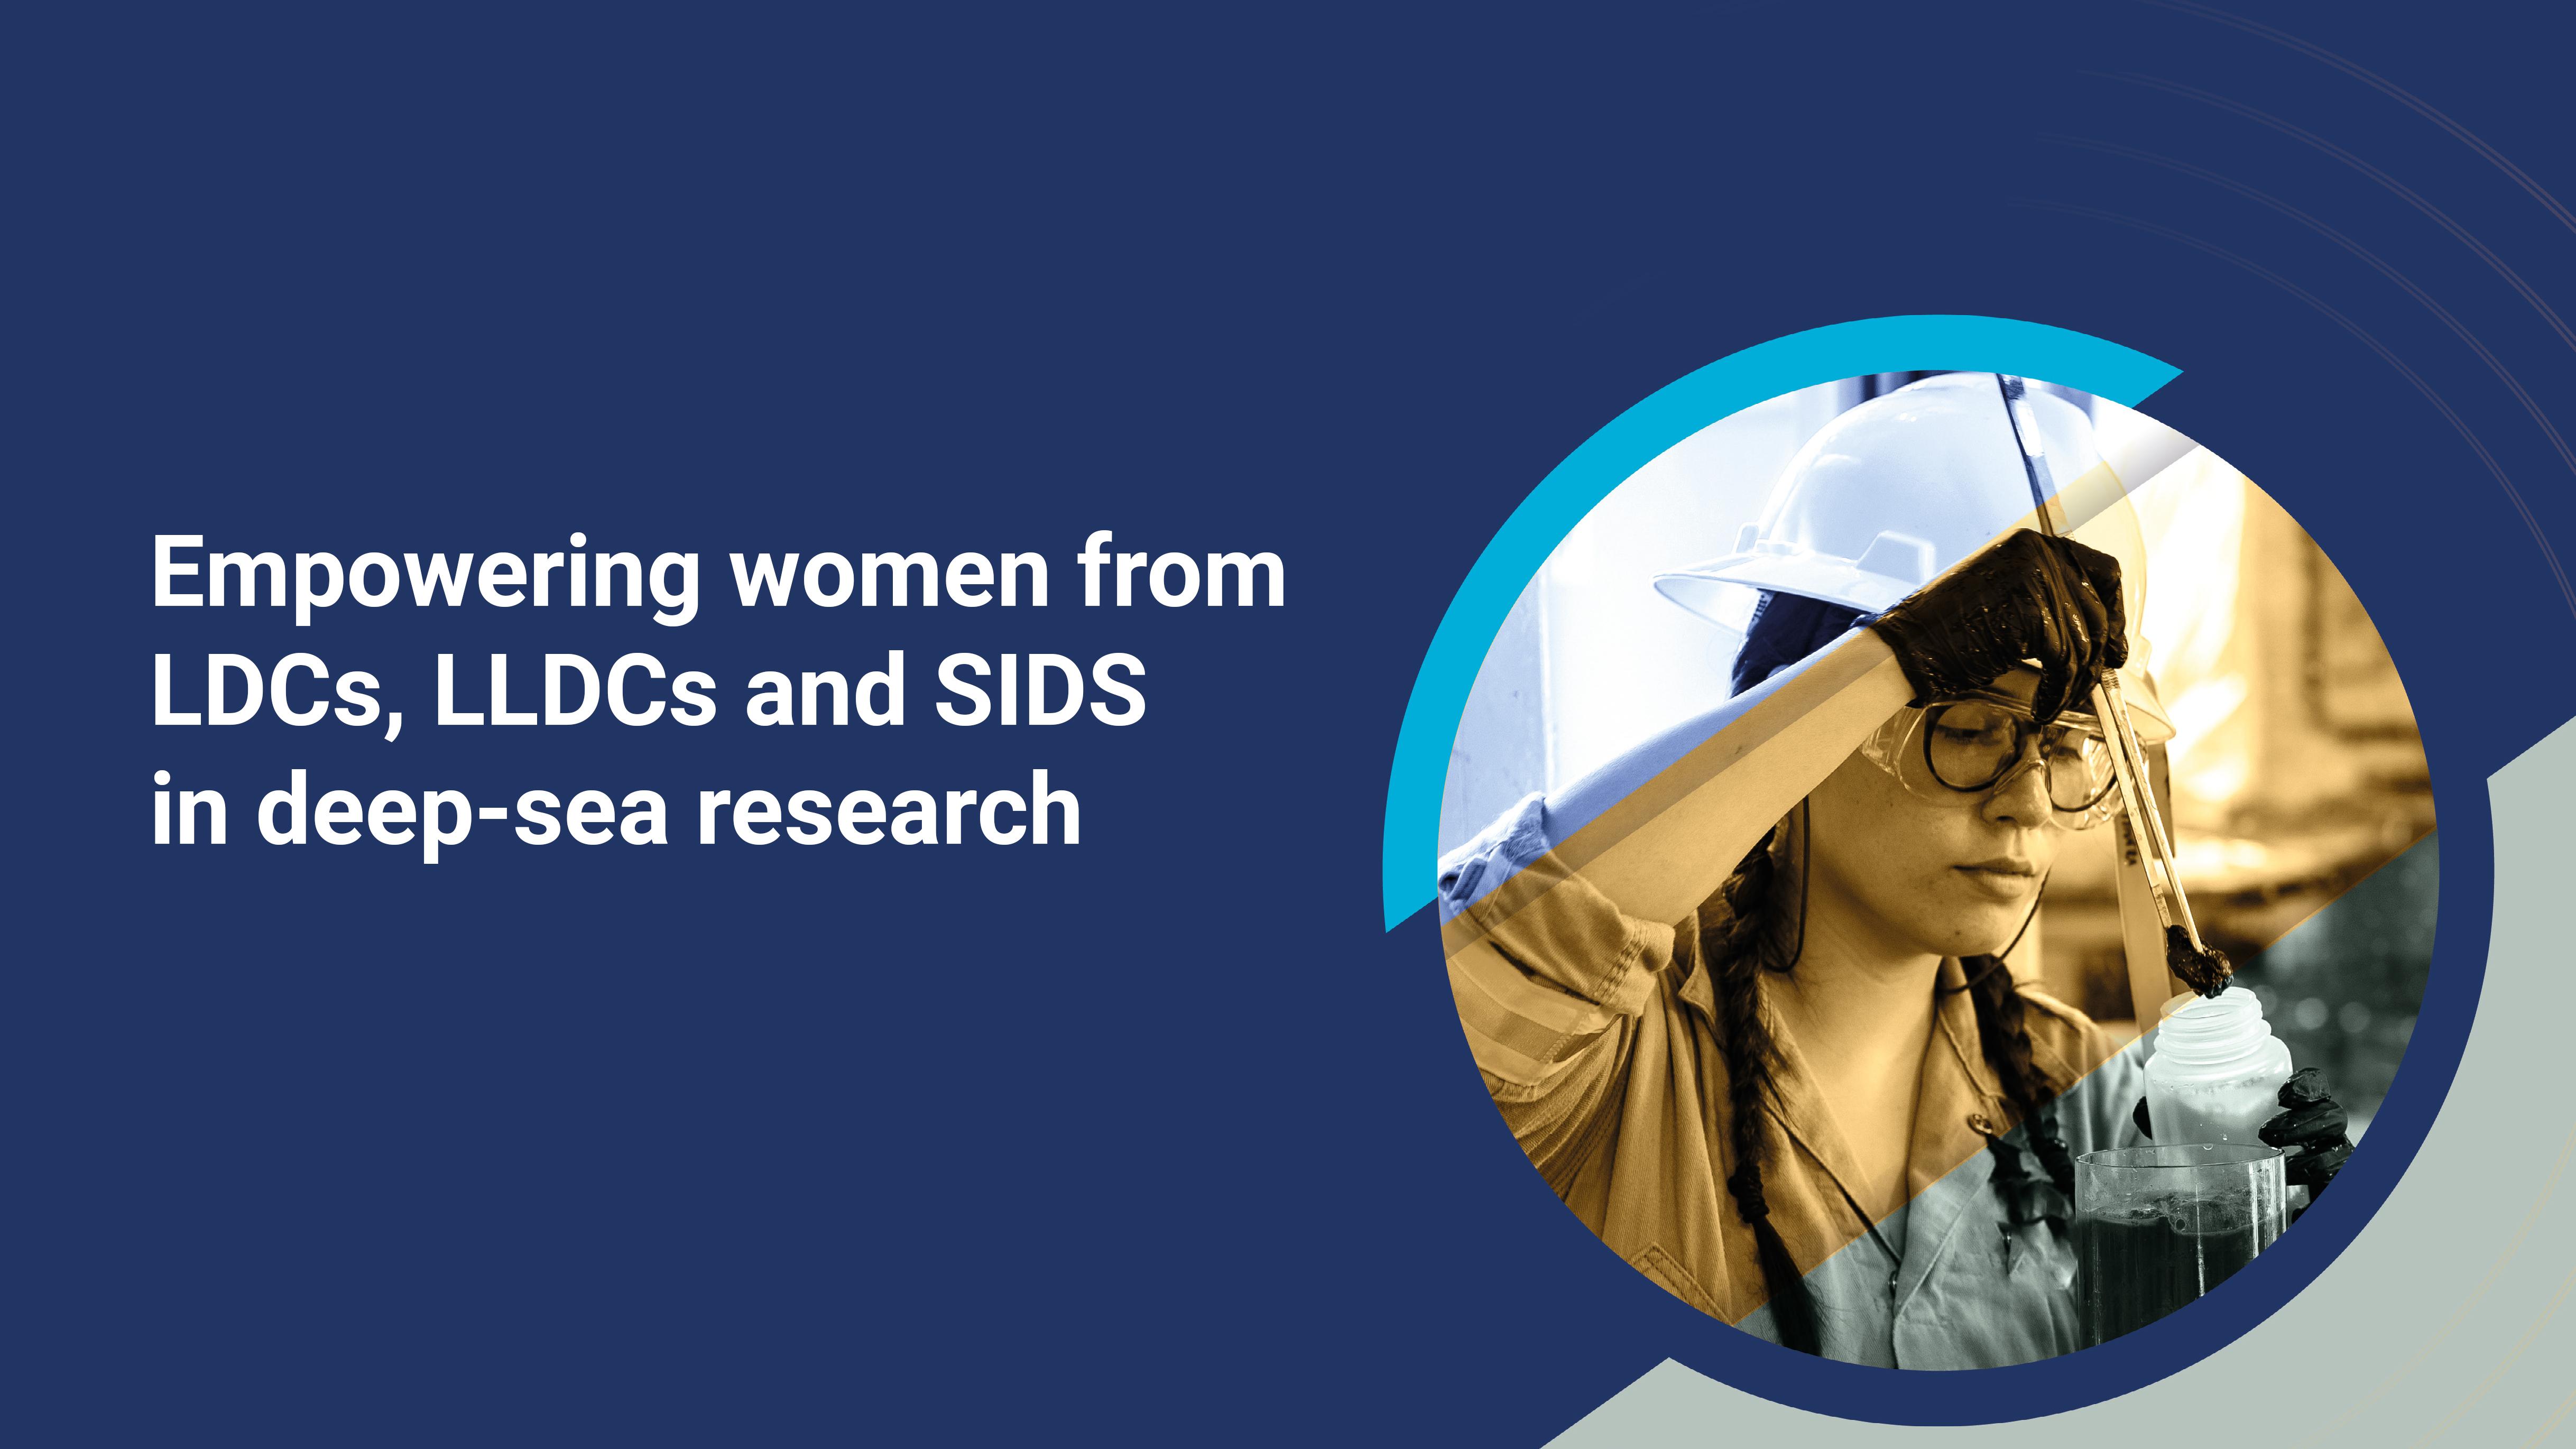 Empowering women from LDCs, LLDCs and SIDS in deep-sea research